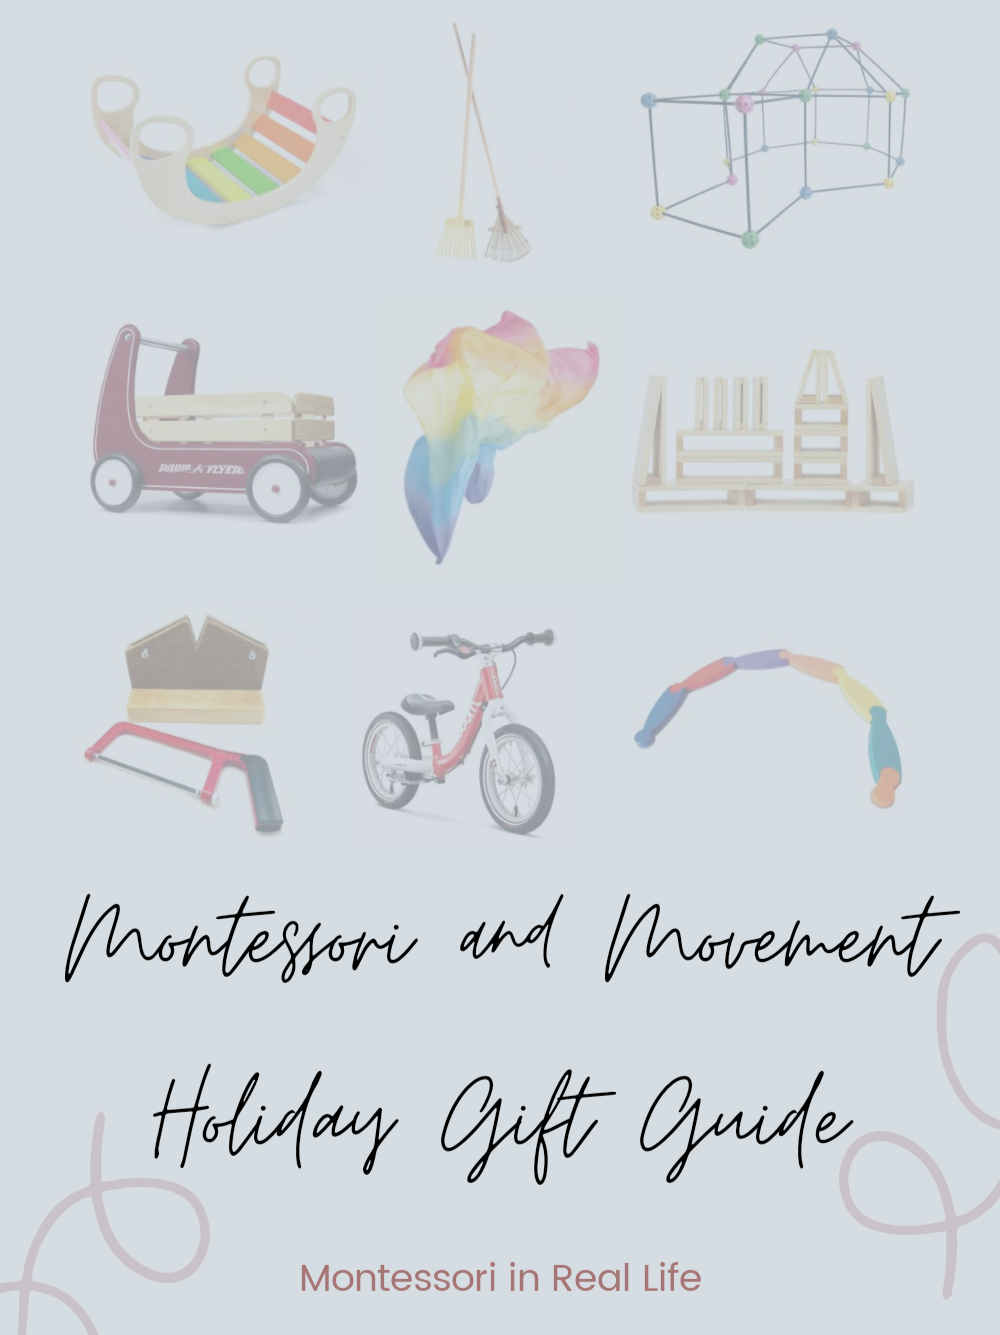 A Montessori and Movement Holiday Gift Guide